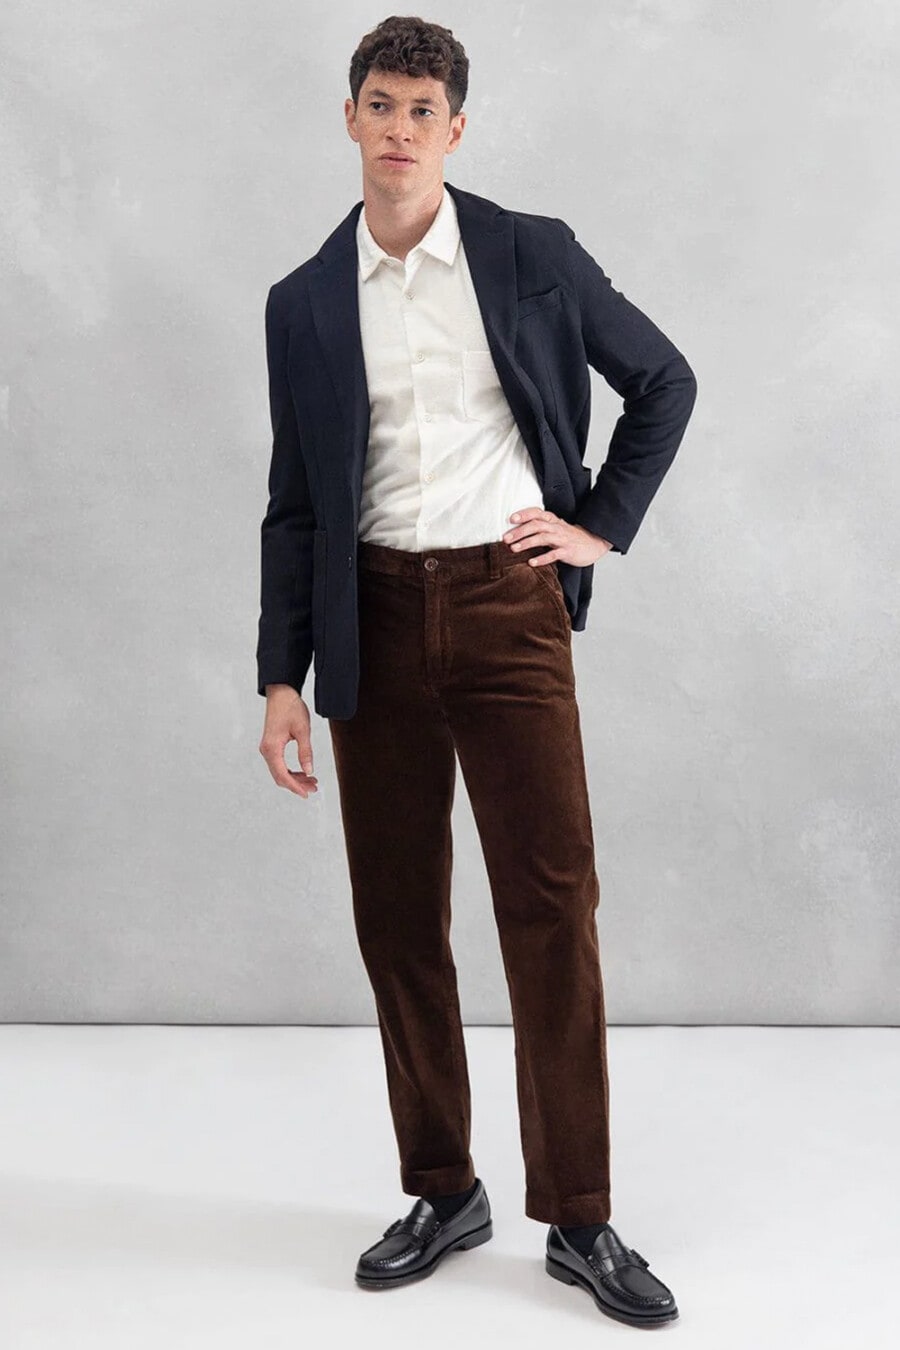 Men's Navy blazer, white shirt, brown corduroy pants and black leather penny loafers outfit